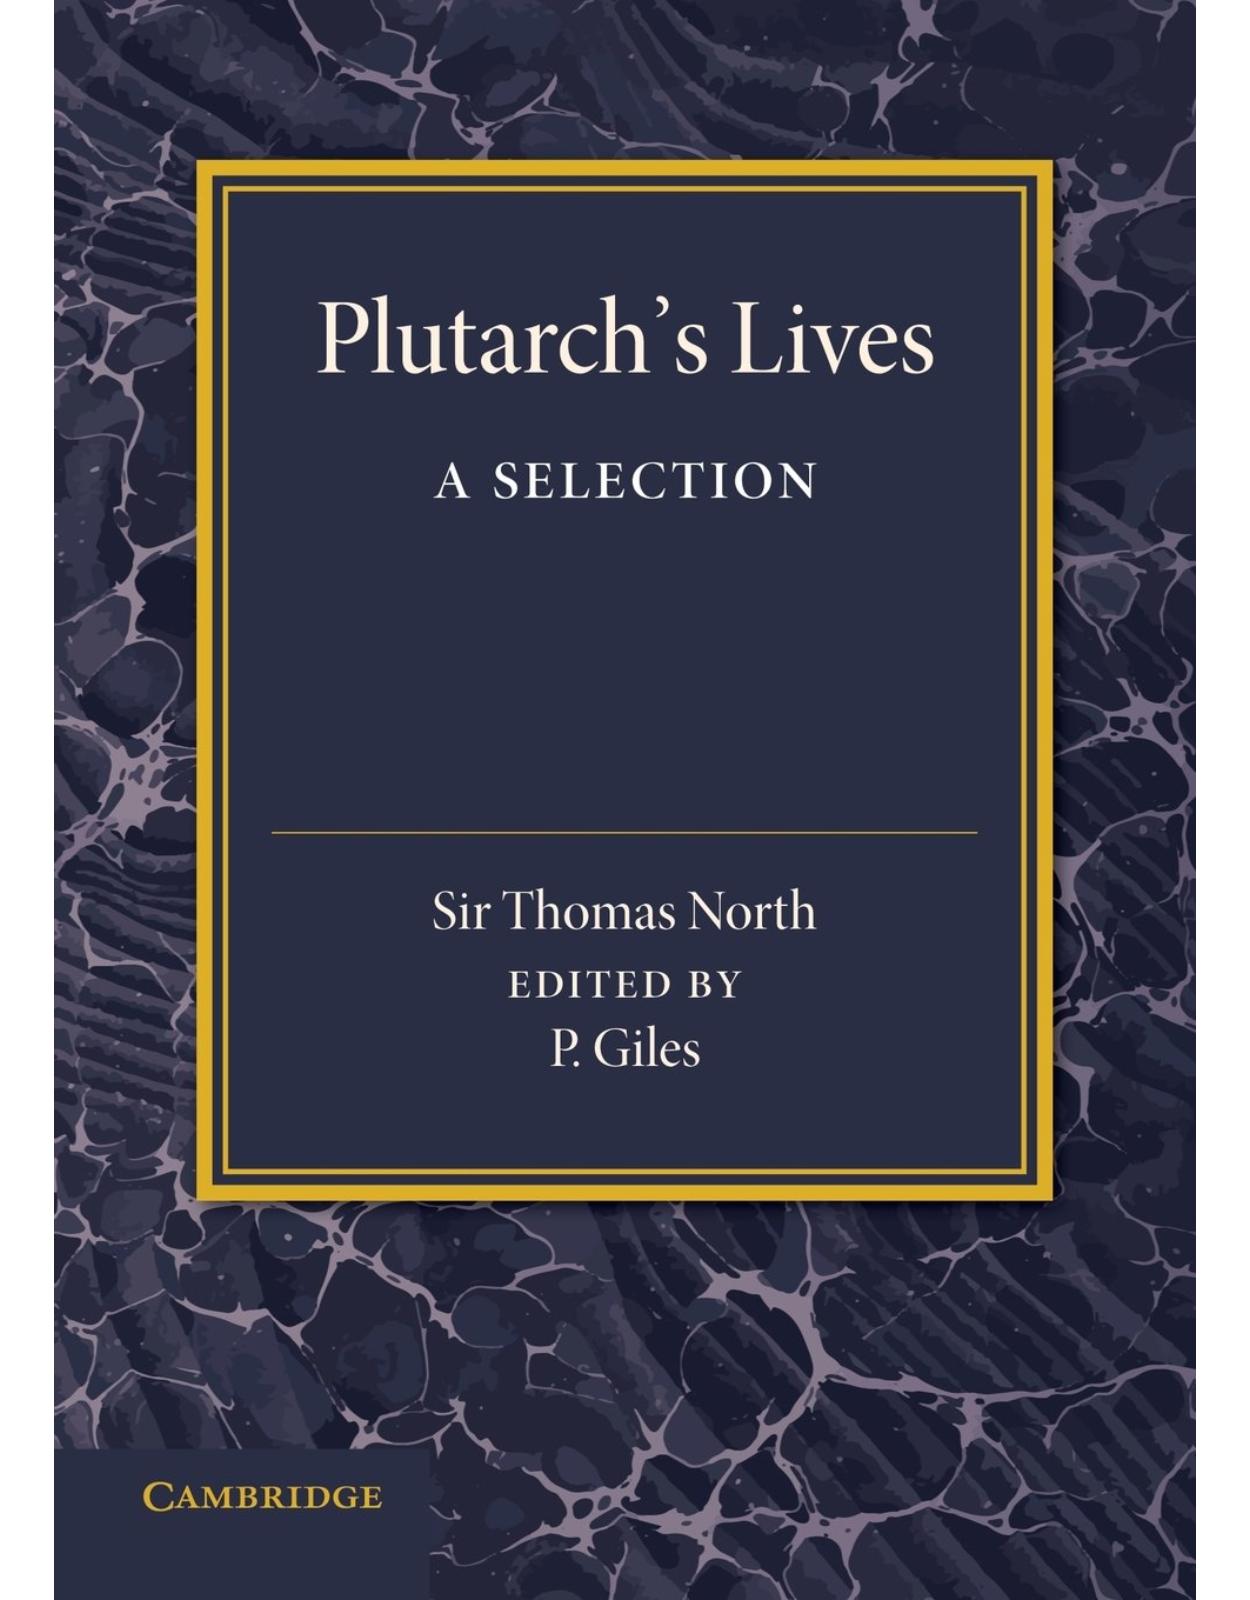 Plutarch's Lives: A Selection